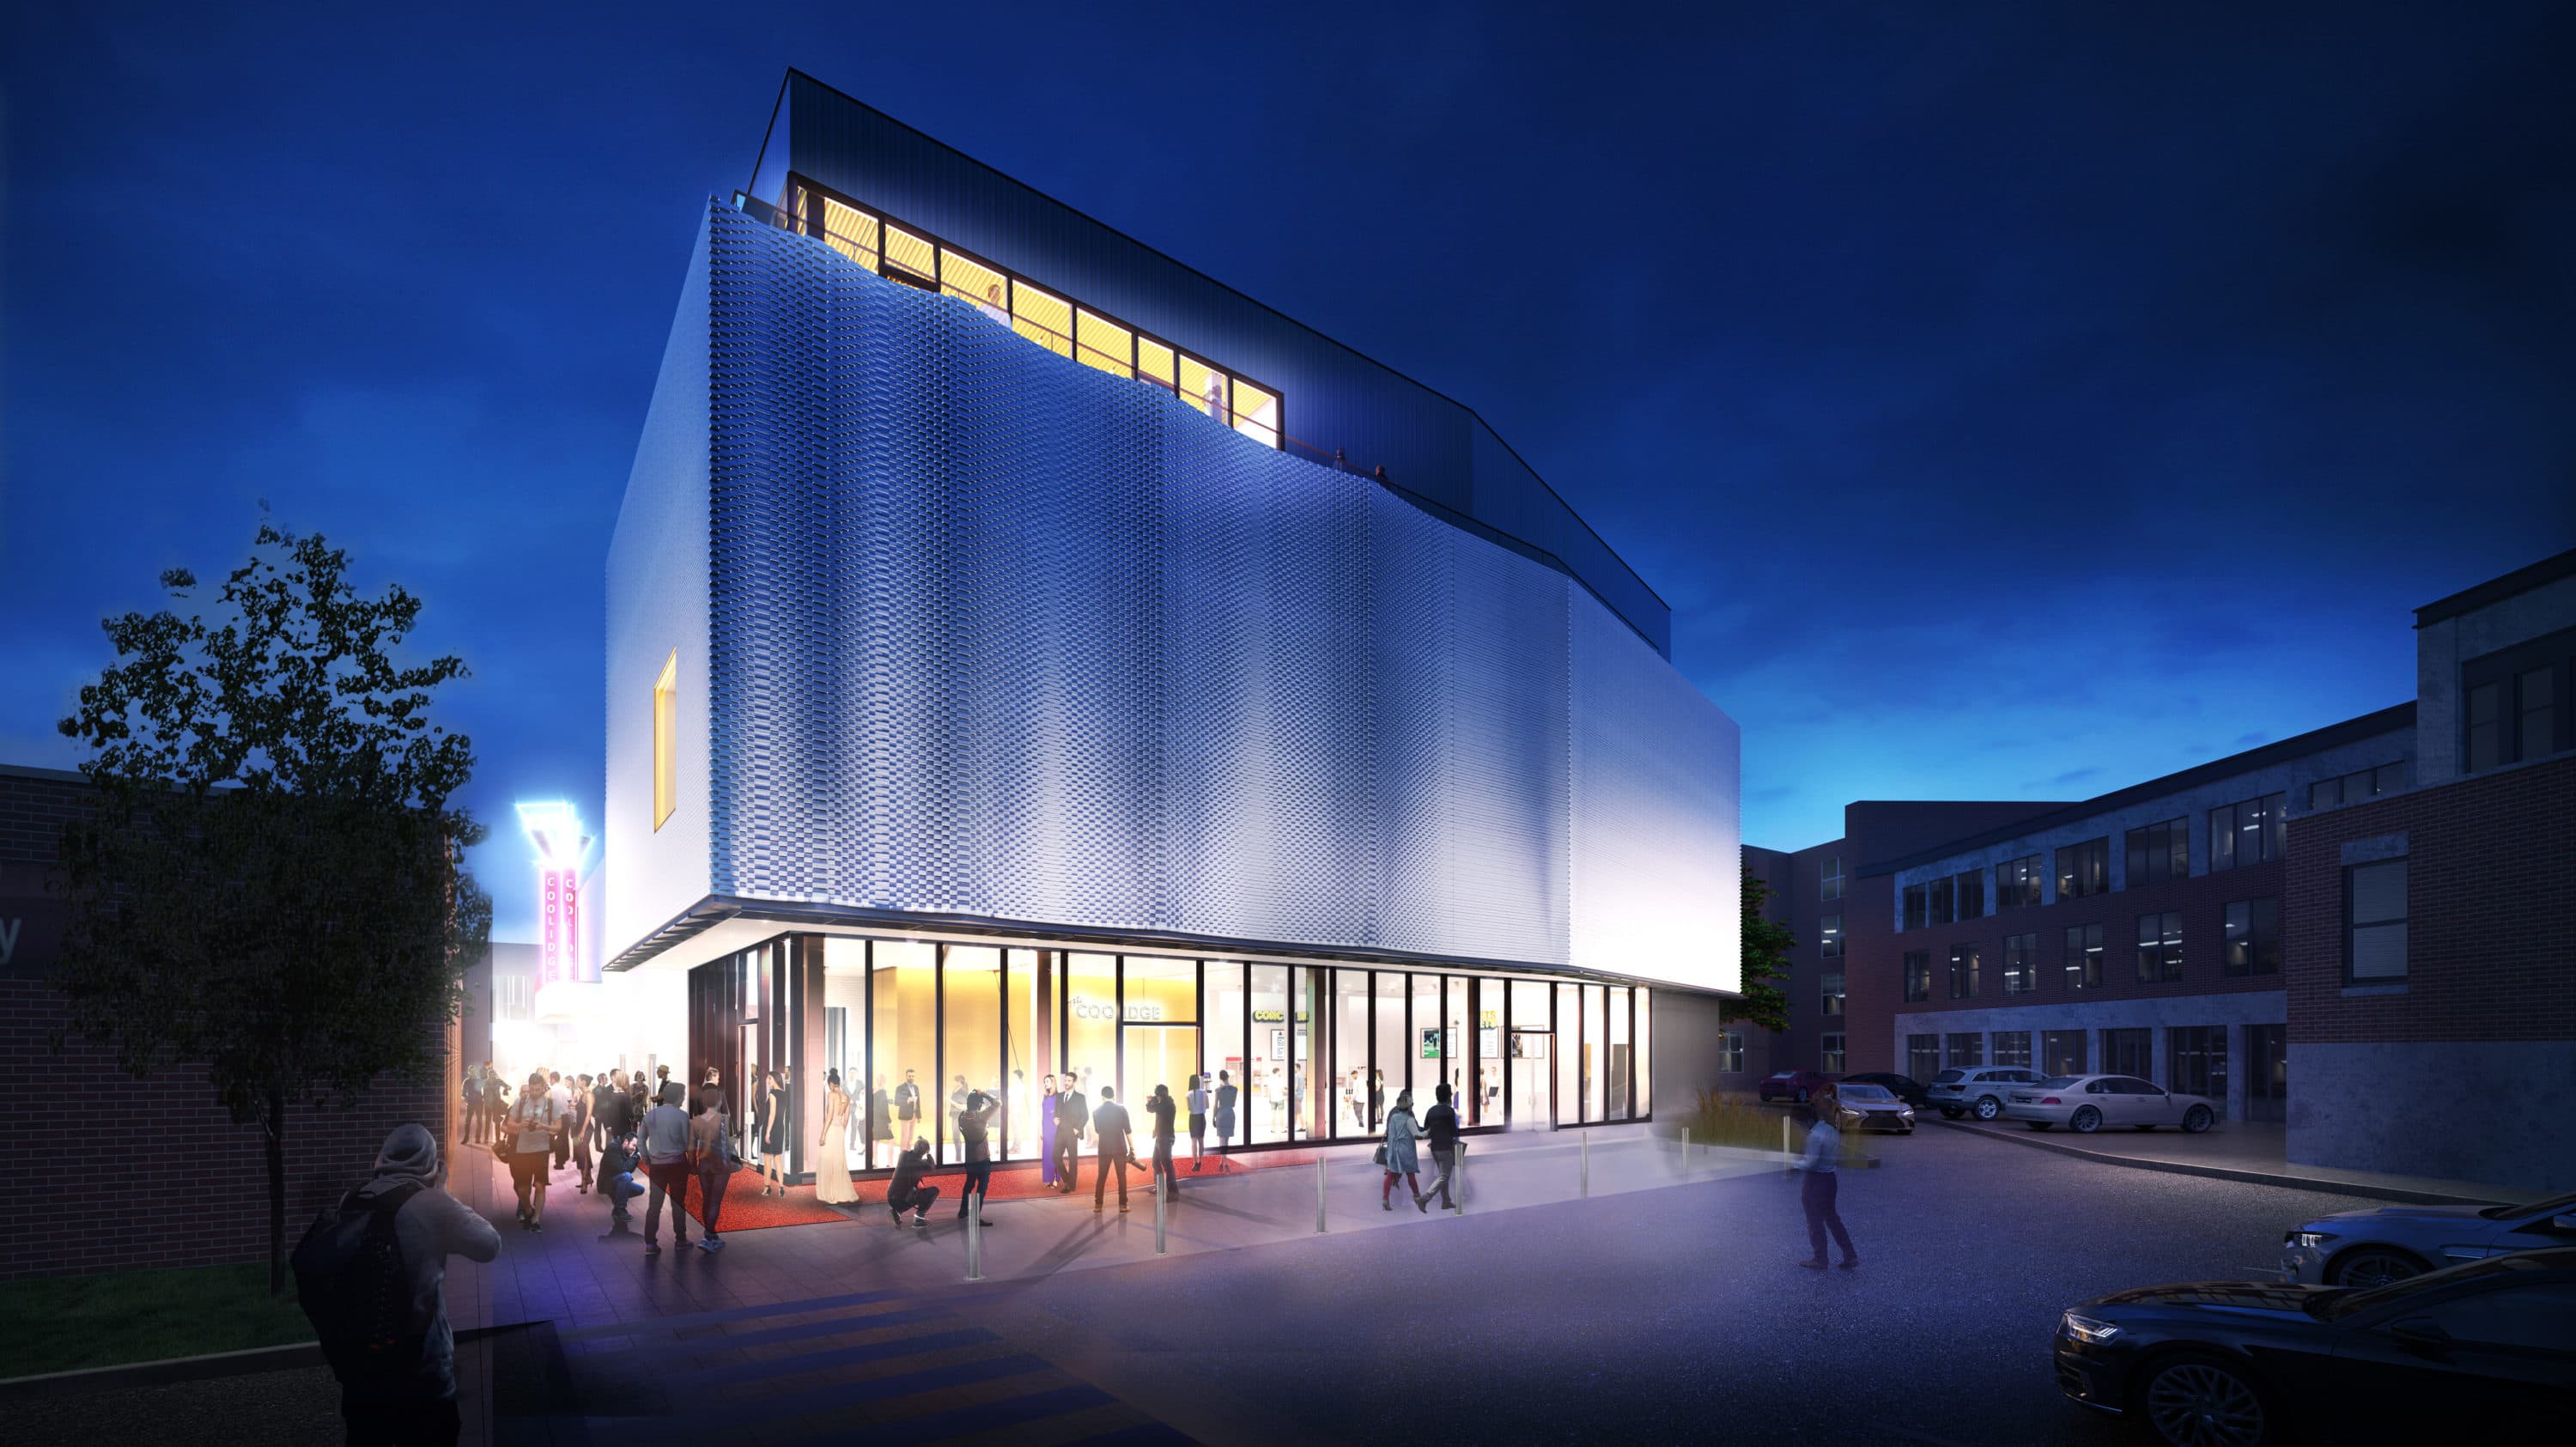 A rendering of the new Centre Street entrance at the Coolidge Corner Theatre. (Courtesy Höweler + Yoon Architecture, LLP)